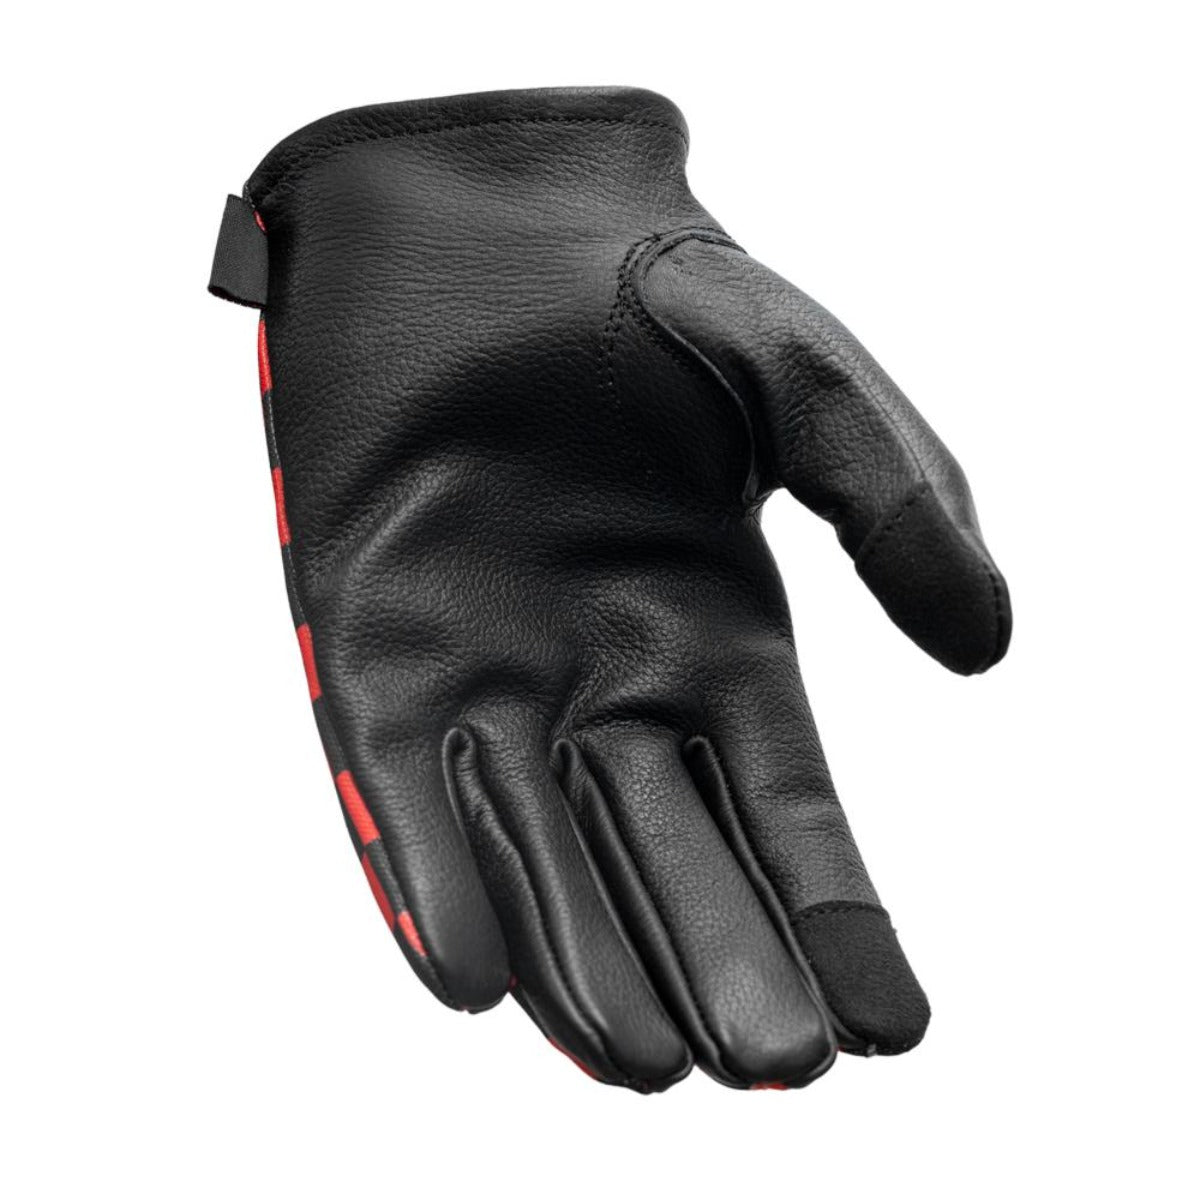 First Manufacturing Clutch - Men's Motorcycle Leather Gloves, Black/Red